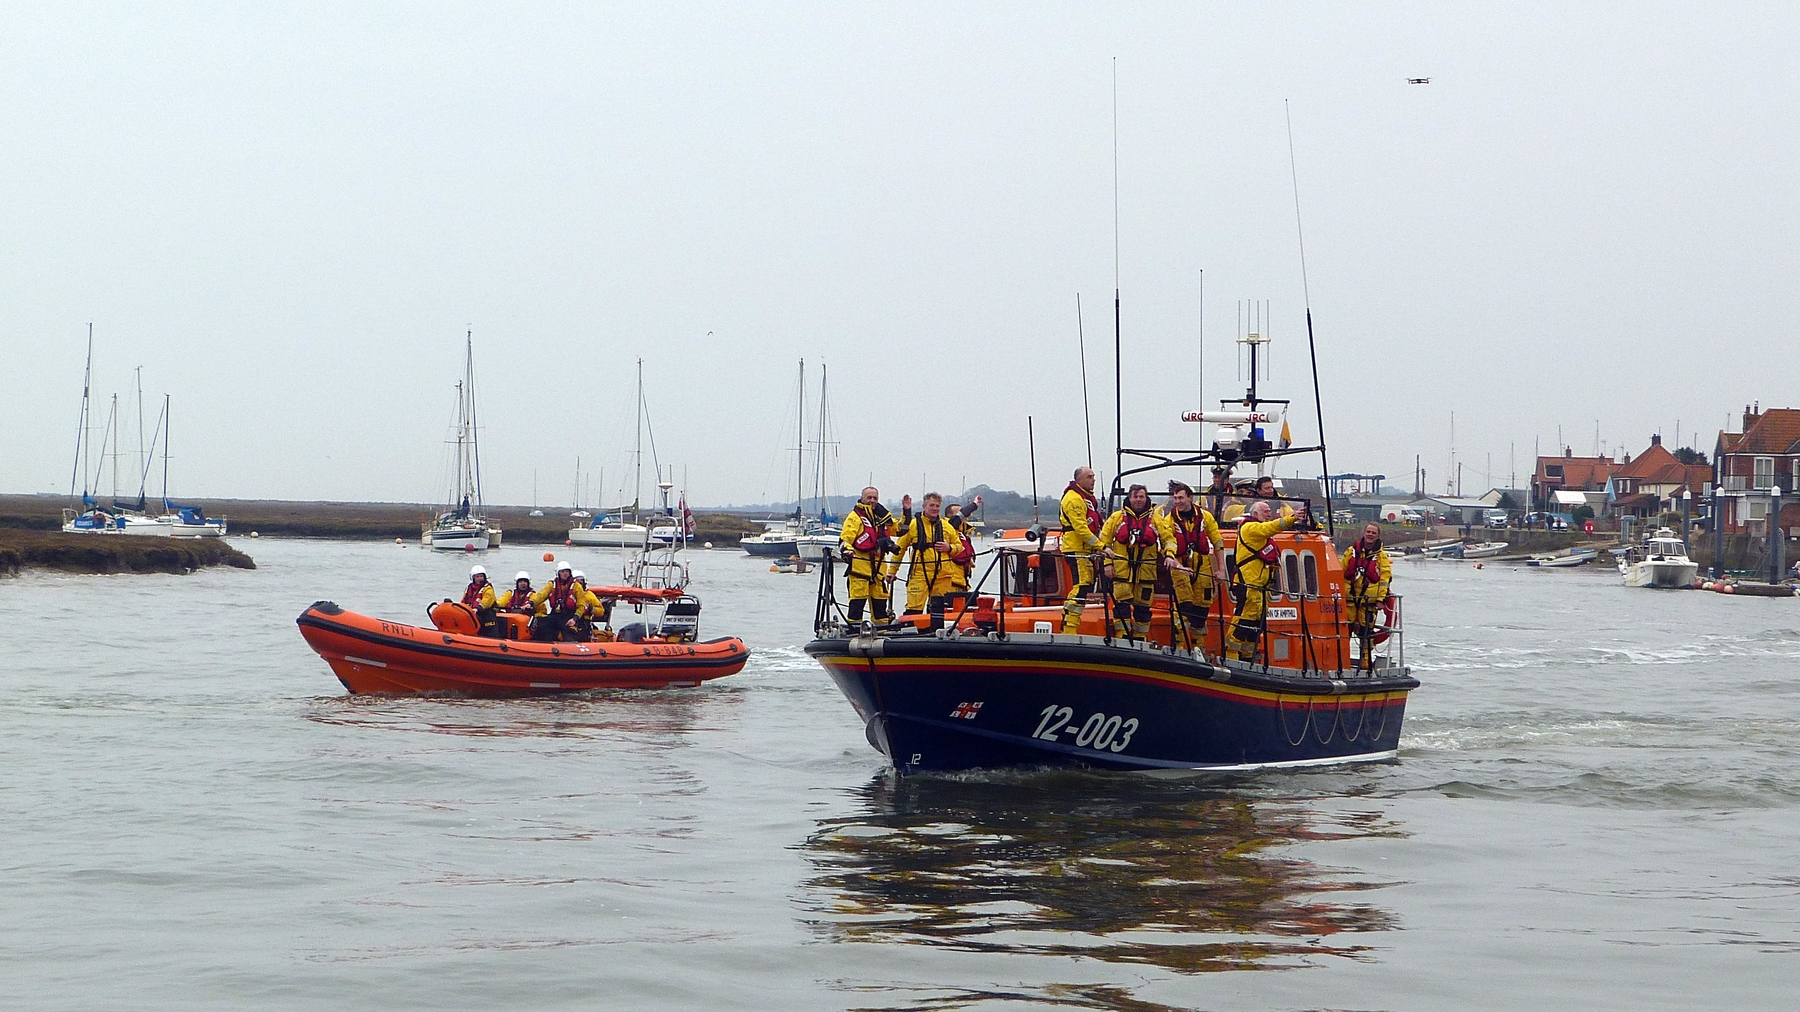 Mersey and Hunstanton lifeboat in the quay